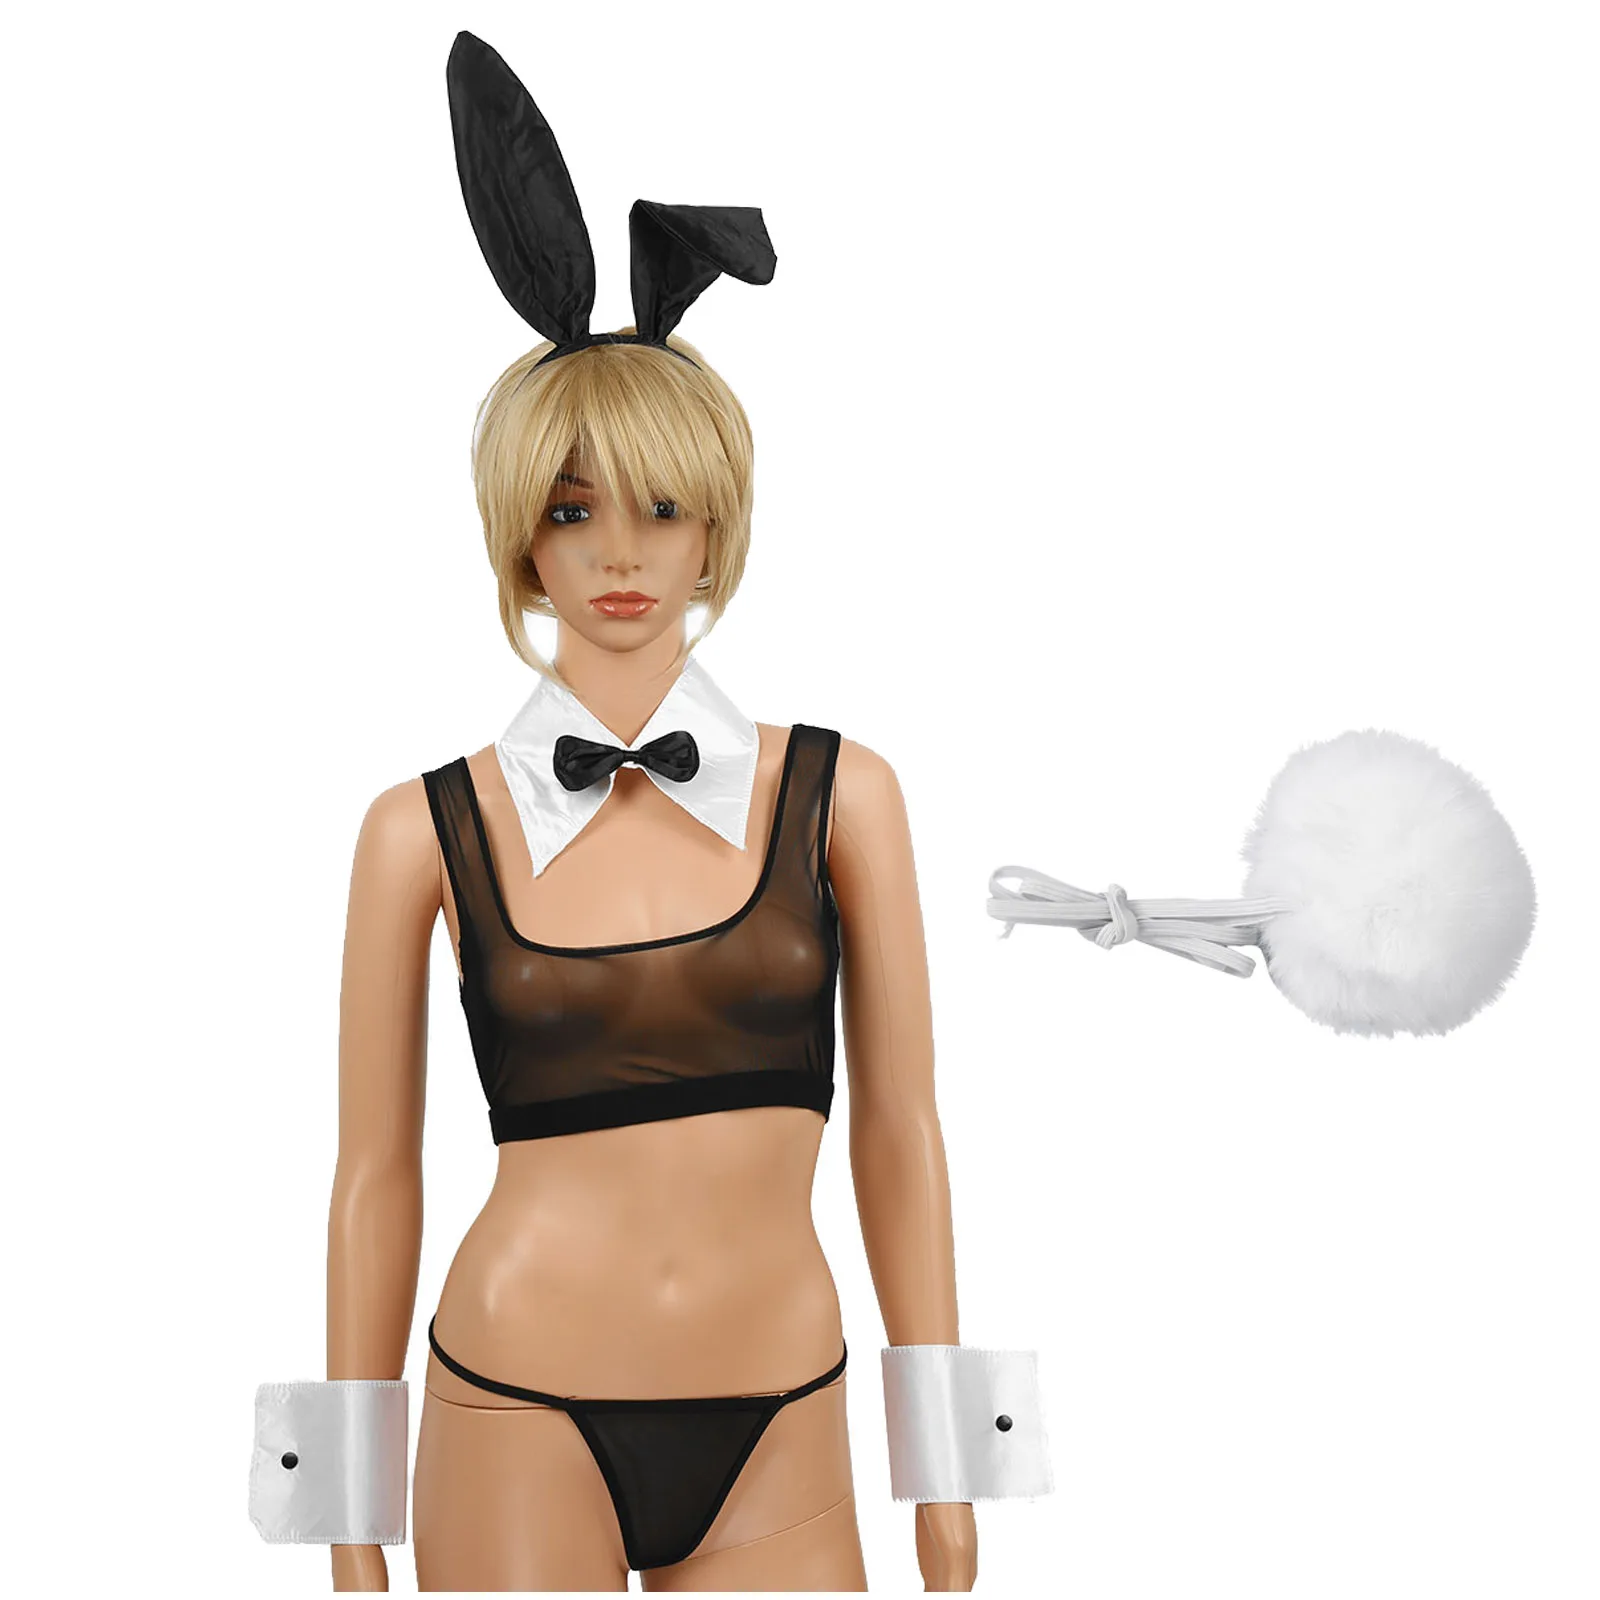 

Women Naughty Bunny Cosplay Lingerie Set Erotic Bachelorette Party Costumes Outfit Sexy Rabbit Girl Headband with Bow Tie Cuffs